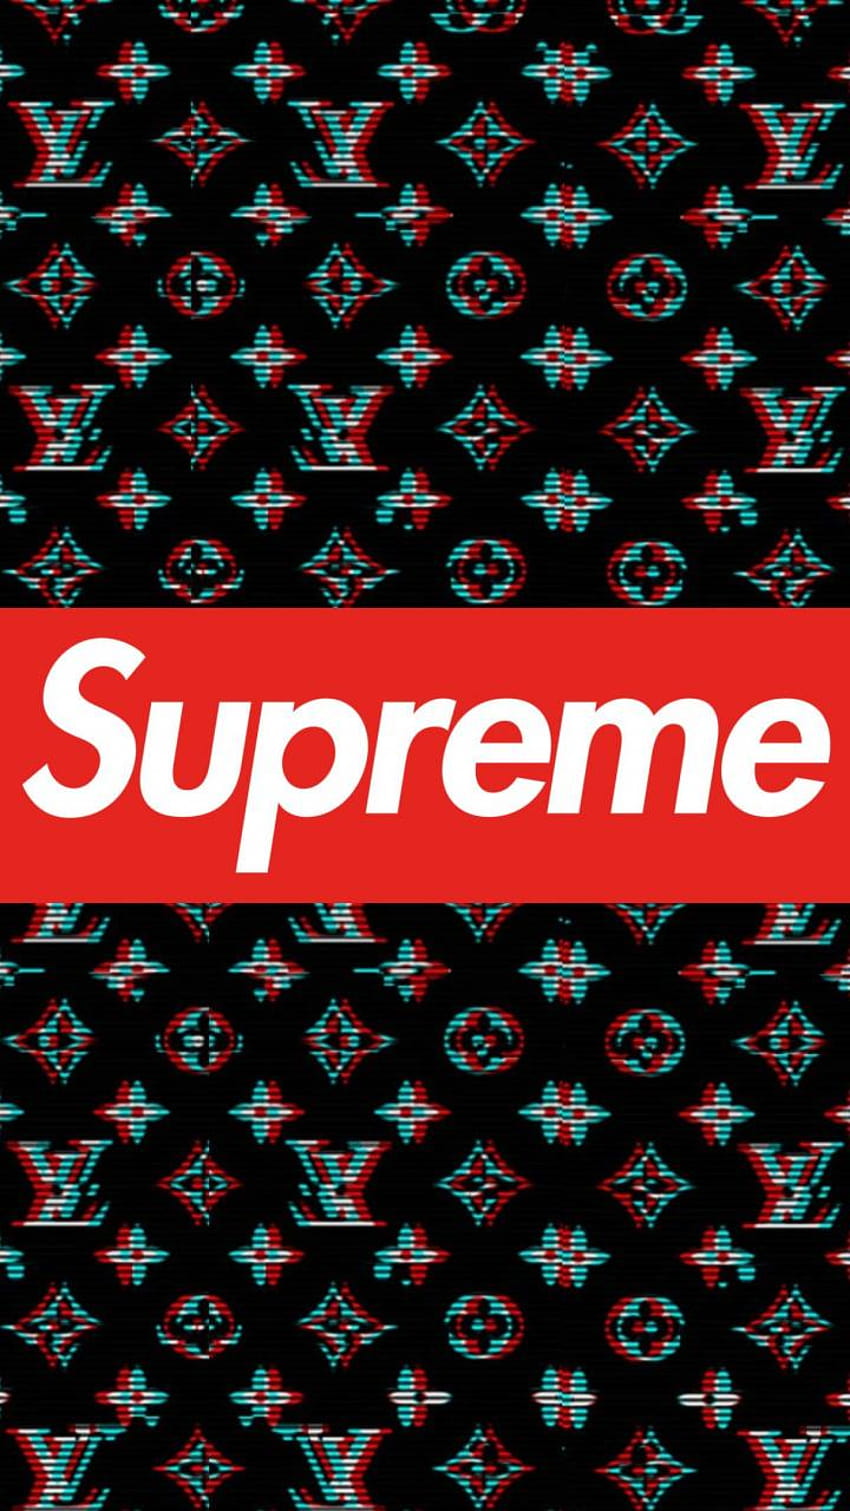 Design, Brand, Text, Louis Vuitton, Supreme for Android, supreme galaxy HD  phone wallpaper